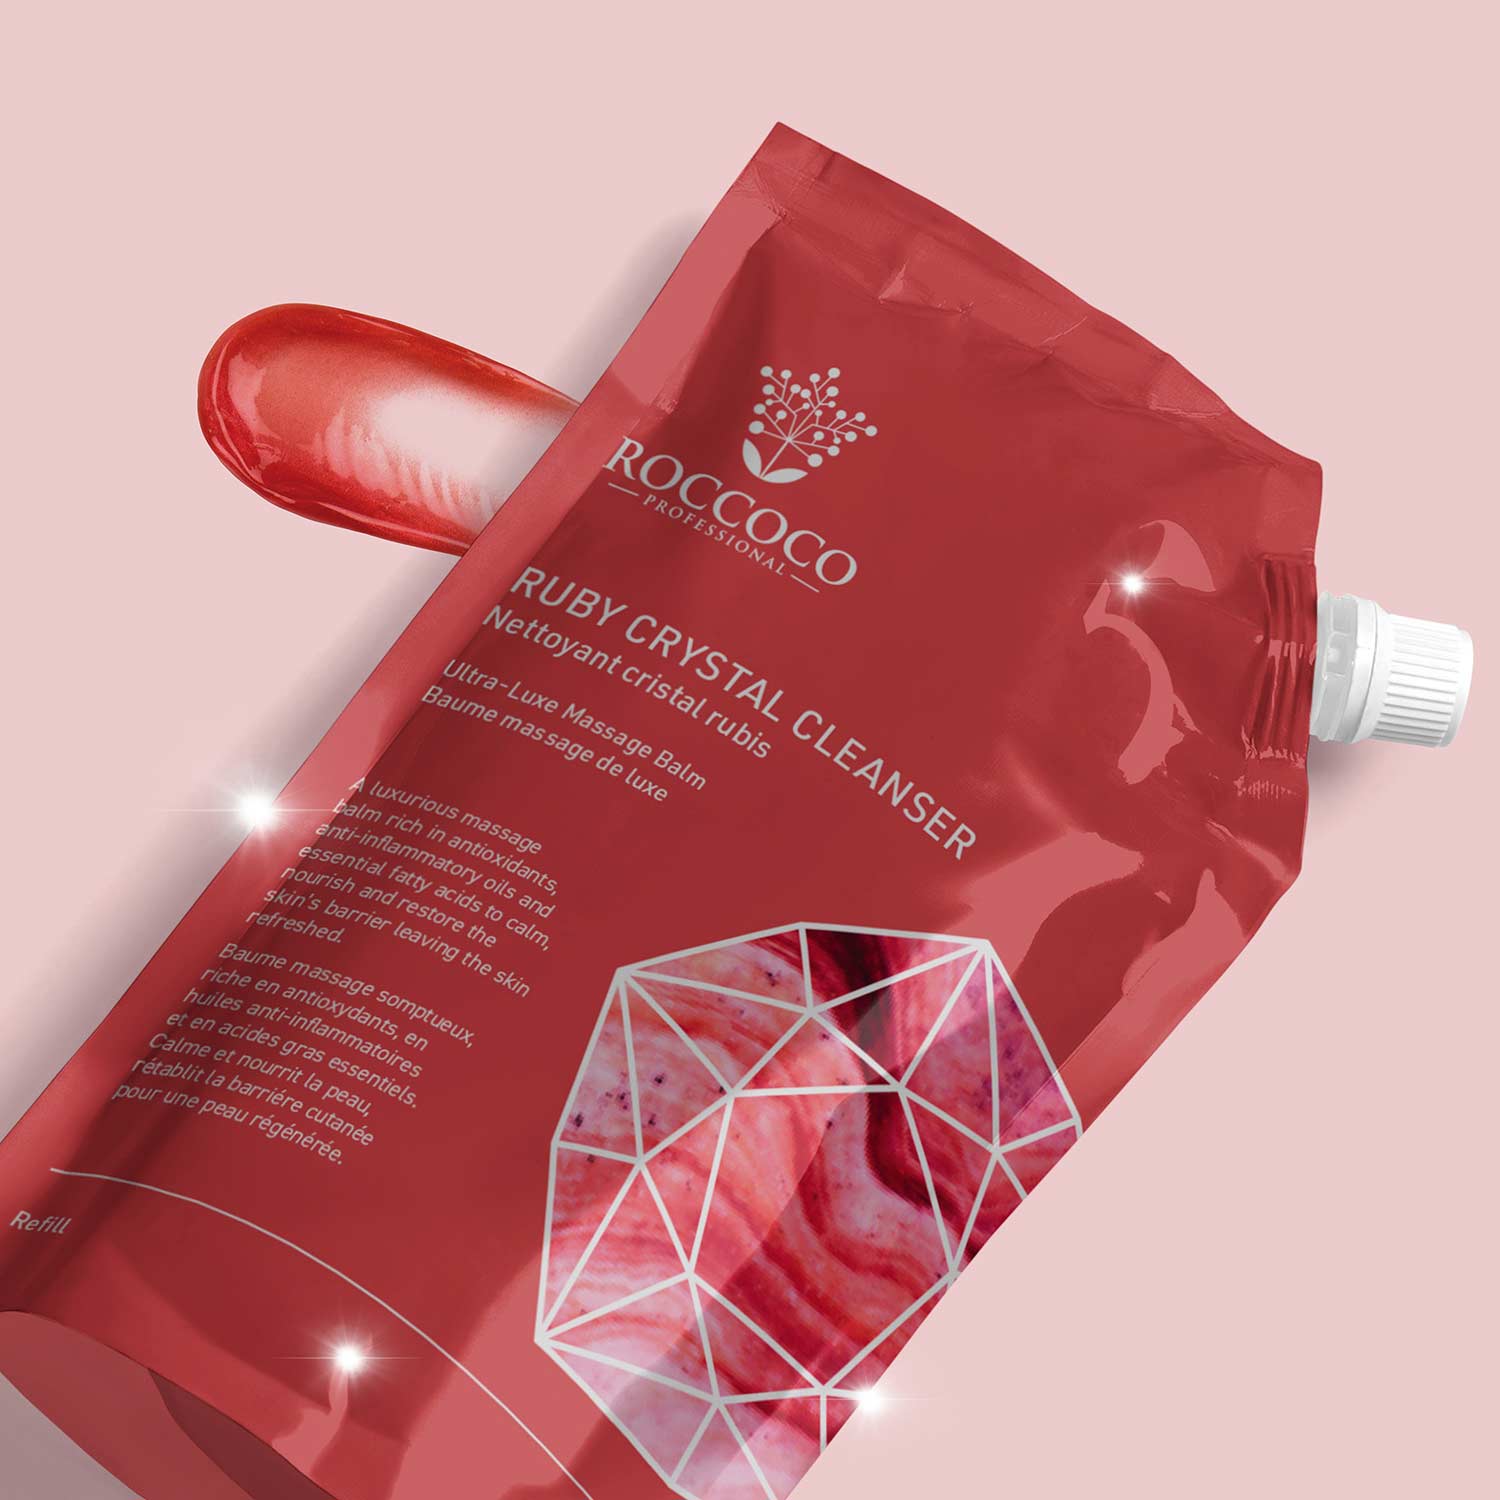 Ruby Crystal Cleanser